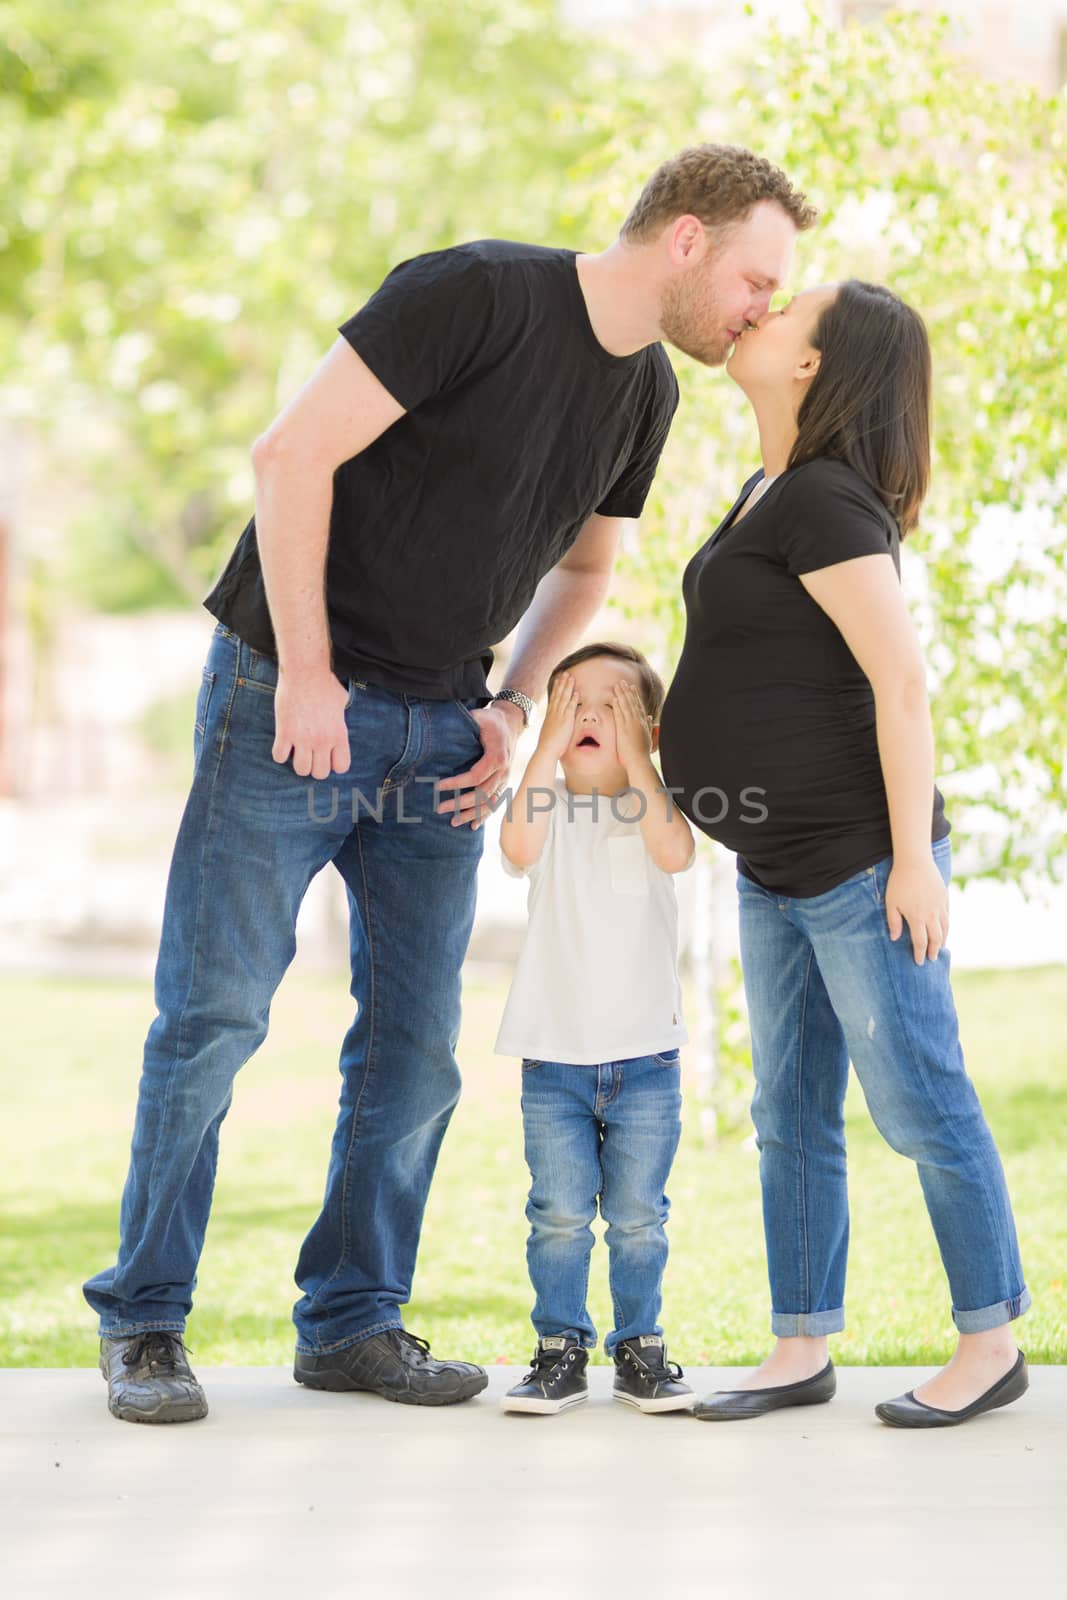 Young Mixed Race Son Hides Eyes as Pregnant Mommy and Daddy Kiss.